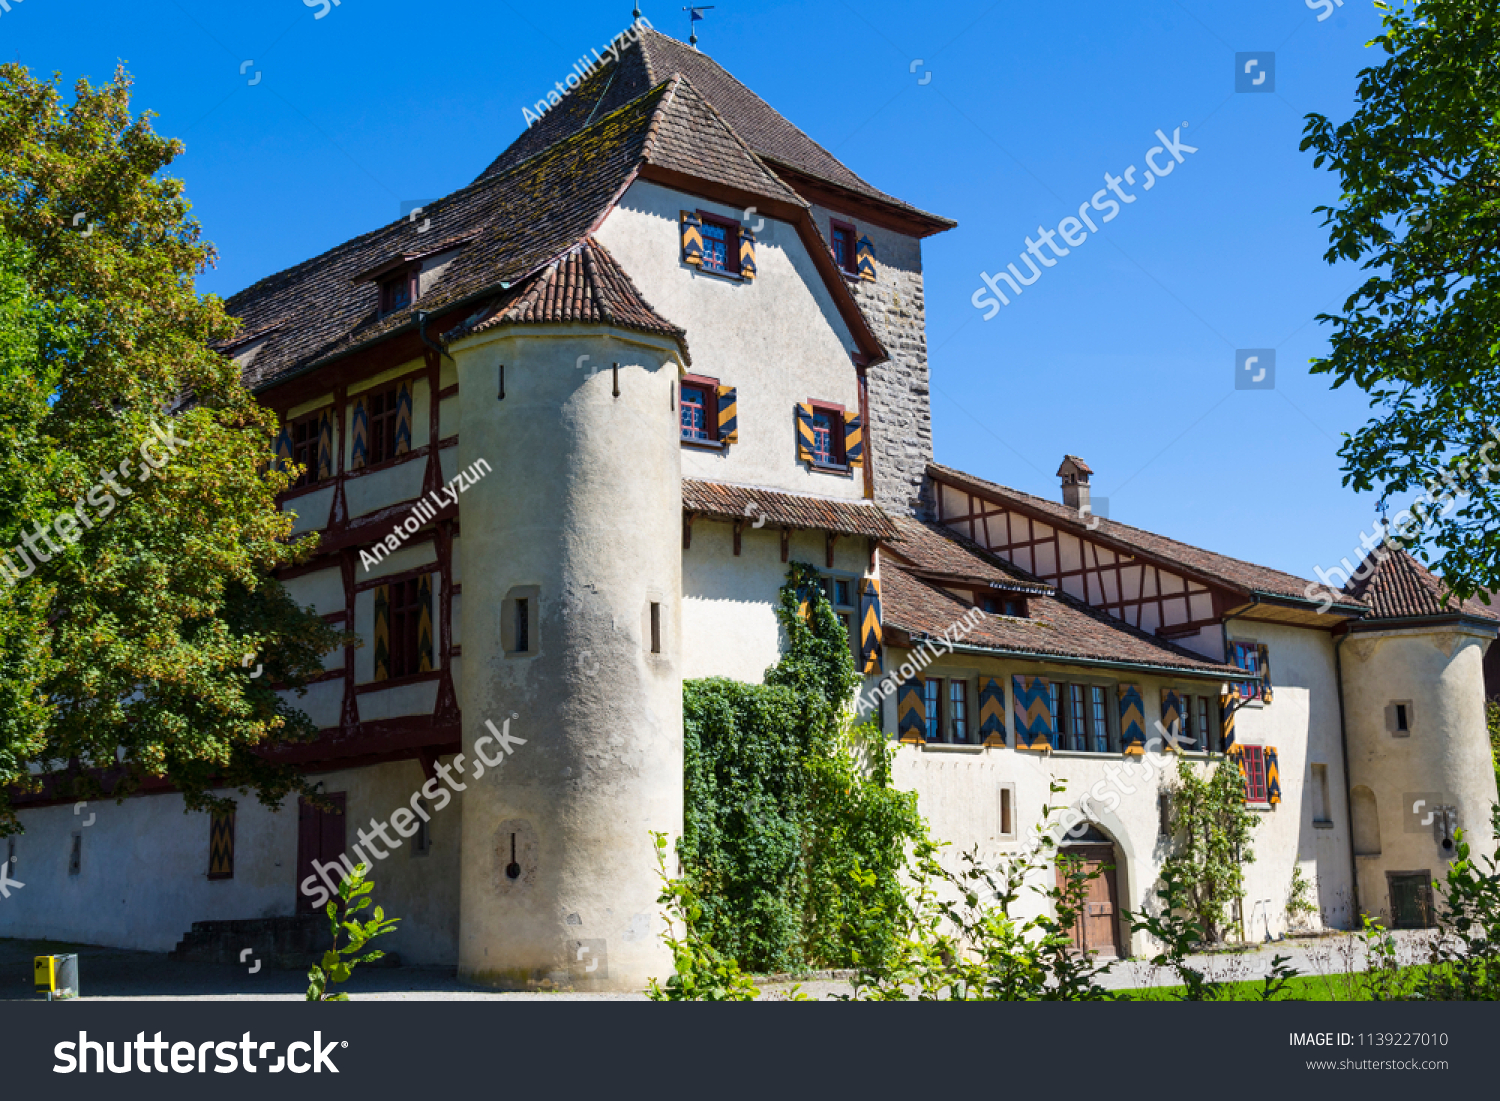 Ancient Hegi castle in the town Winterthur, Switzerland. General view, outside on a blue sky background in a summer day. Tourist attraction, tourist destination. #1139227010